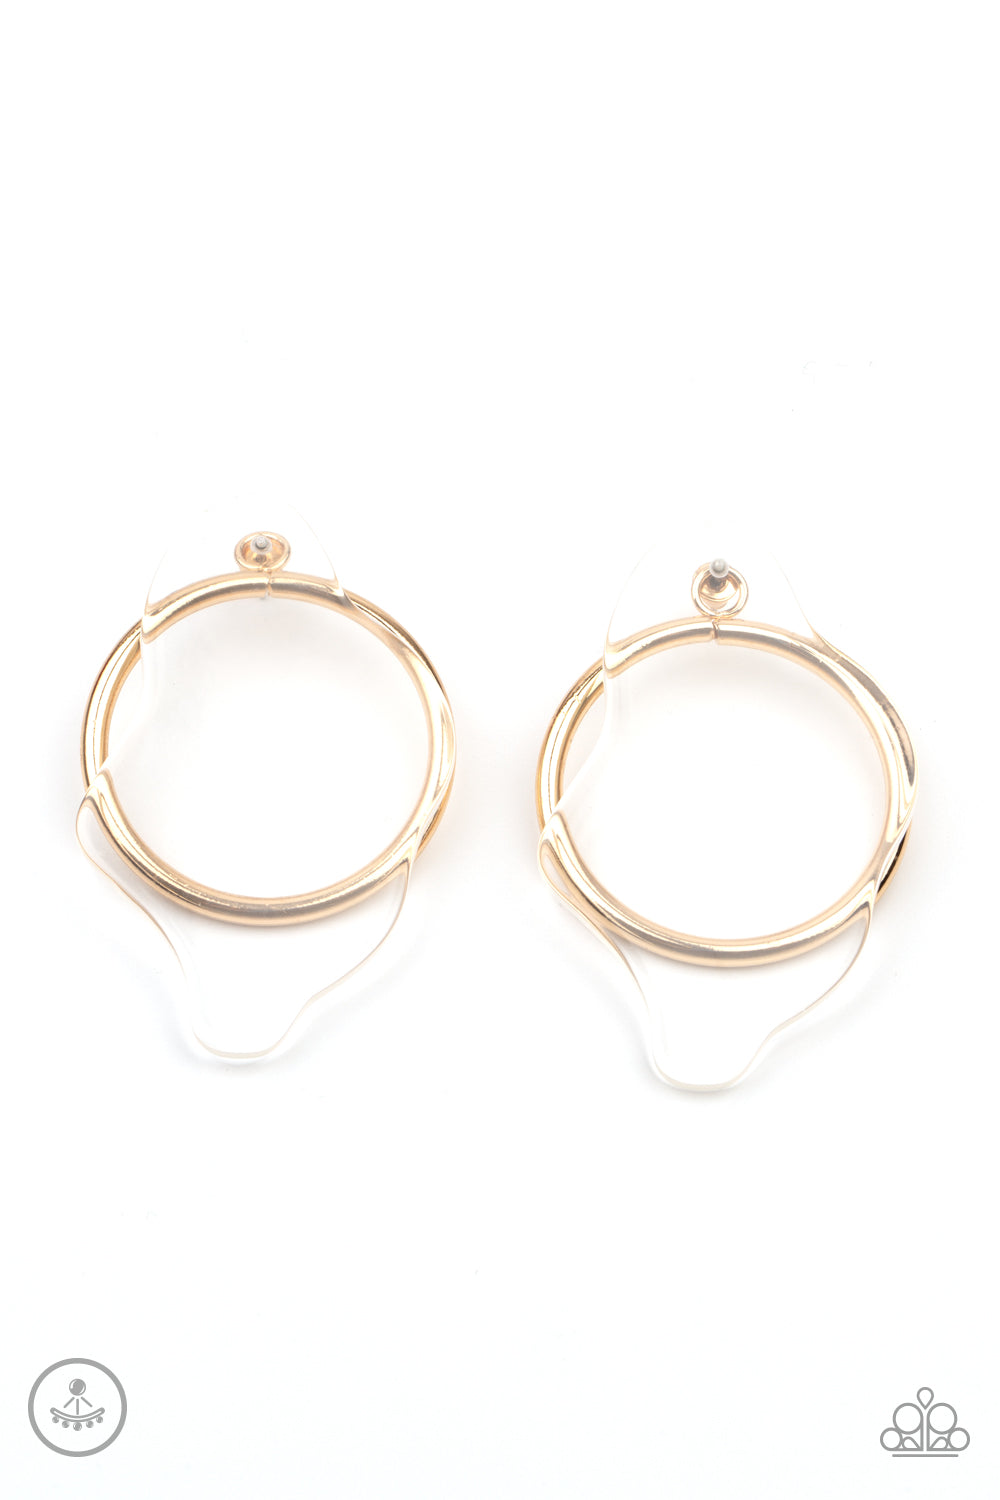 Clear The Way! Earrings - Gold